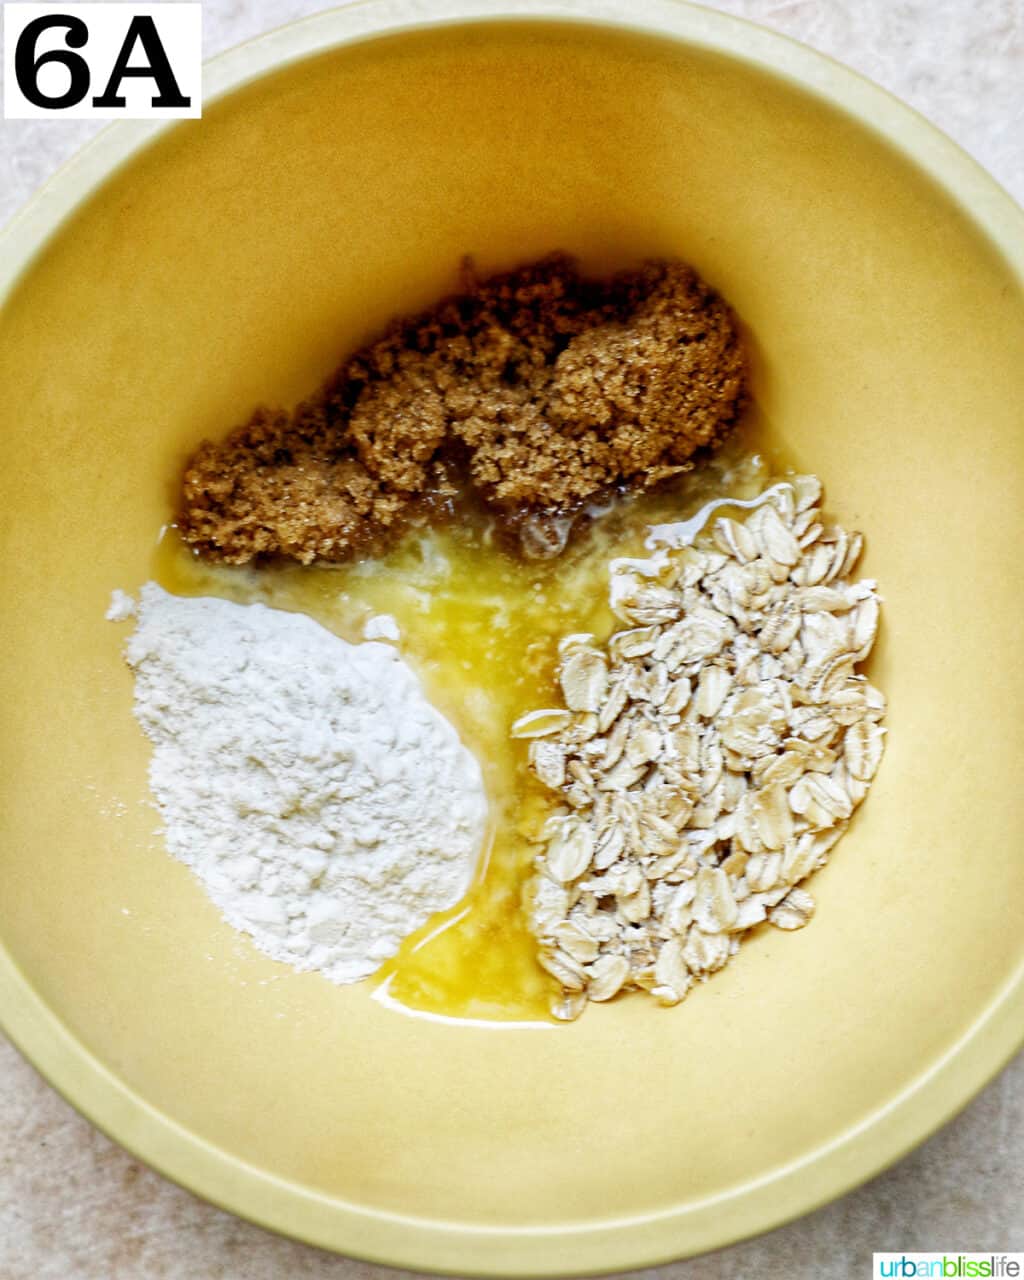 yellow bowl with oats, sugar, and flour to make a streusel topping.